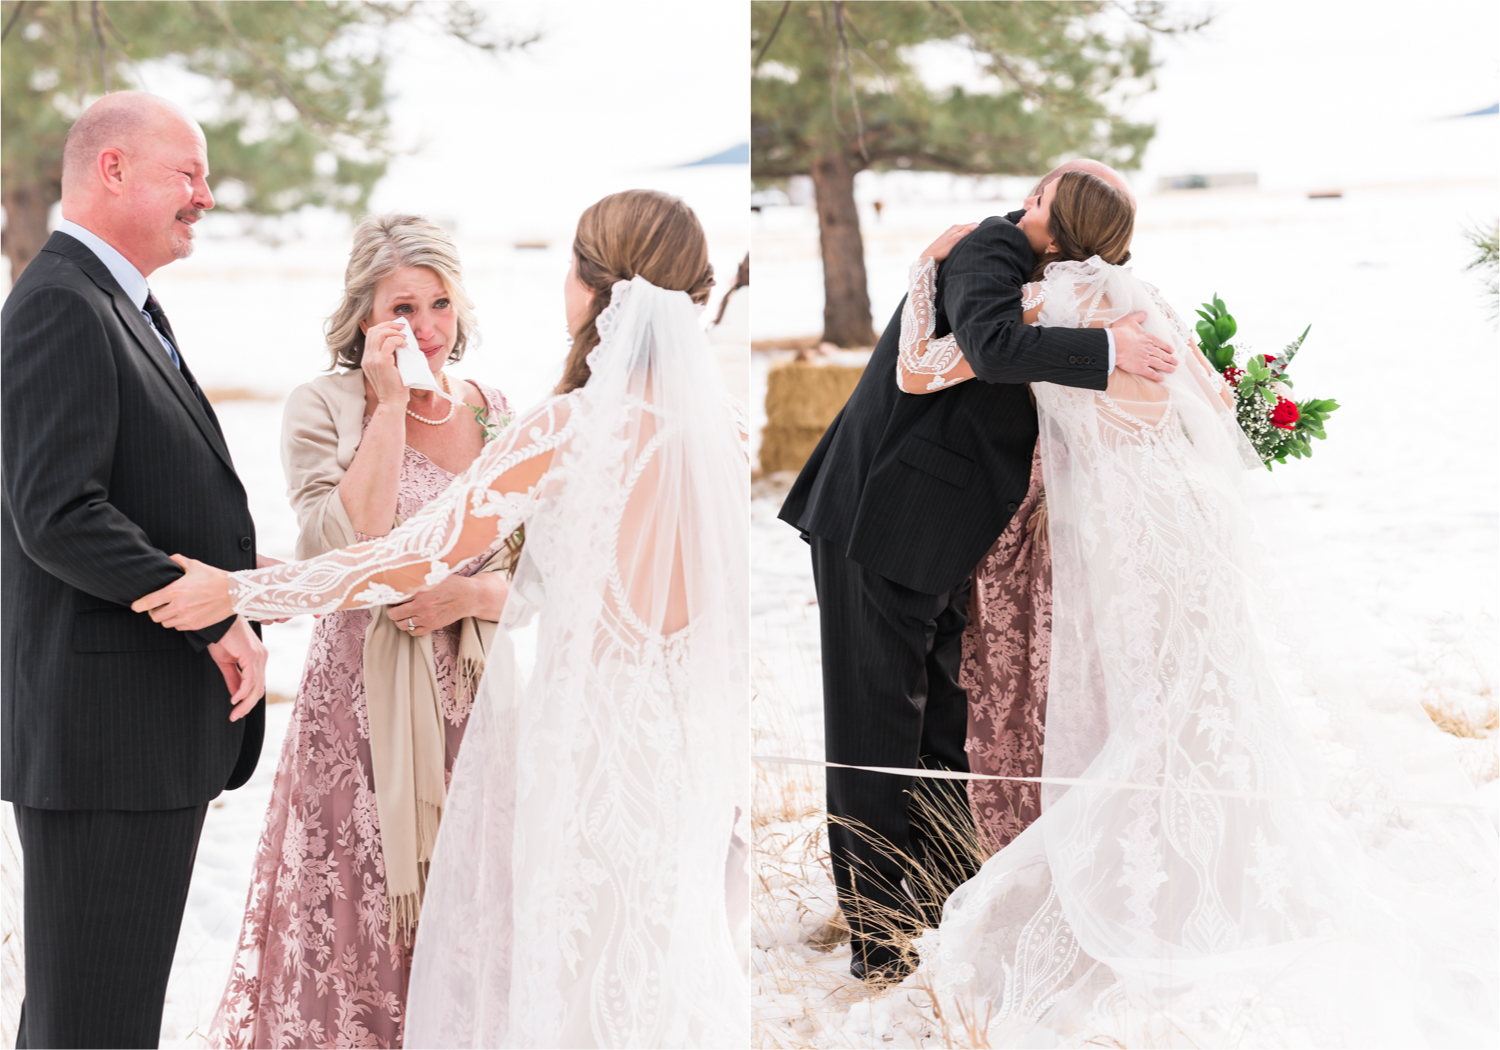 Winter Wonderland Wedding in Colorado Springs | Britni Girard Photography Colorado Wedding Photography and Film Team | Snow covered mountains and Christmas just a few days away | Annika + John's Nostalgic Winter Wedding | Bride's Dress iDream Bridal Essence of Australia | Air Force Academy | Daddy Daughter First Look